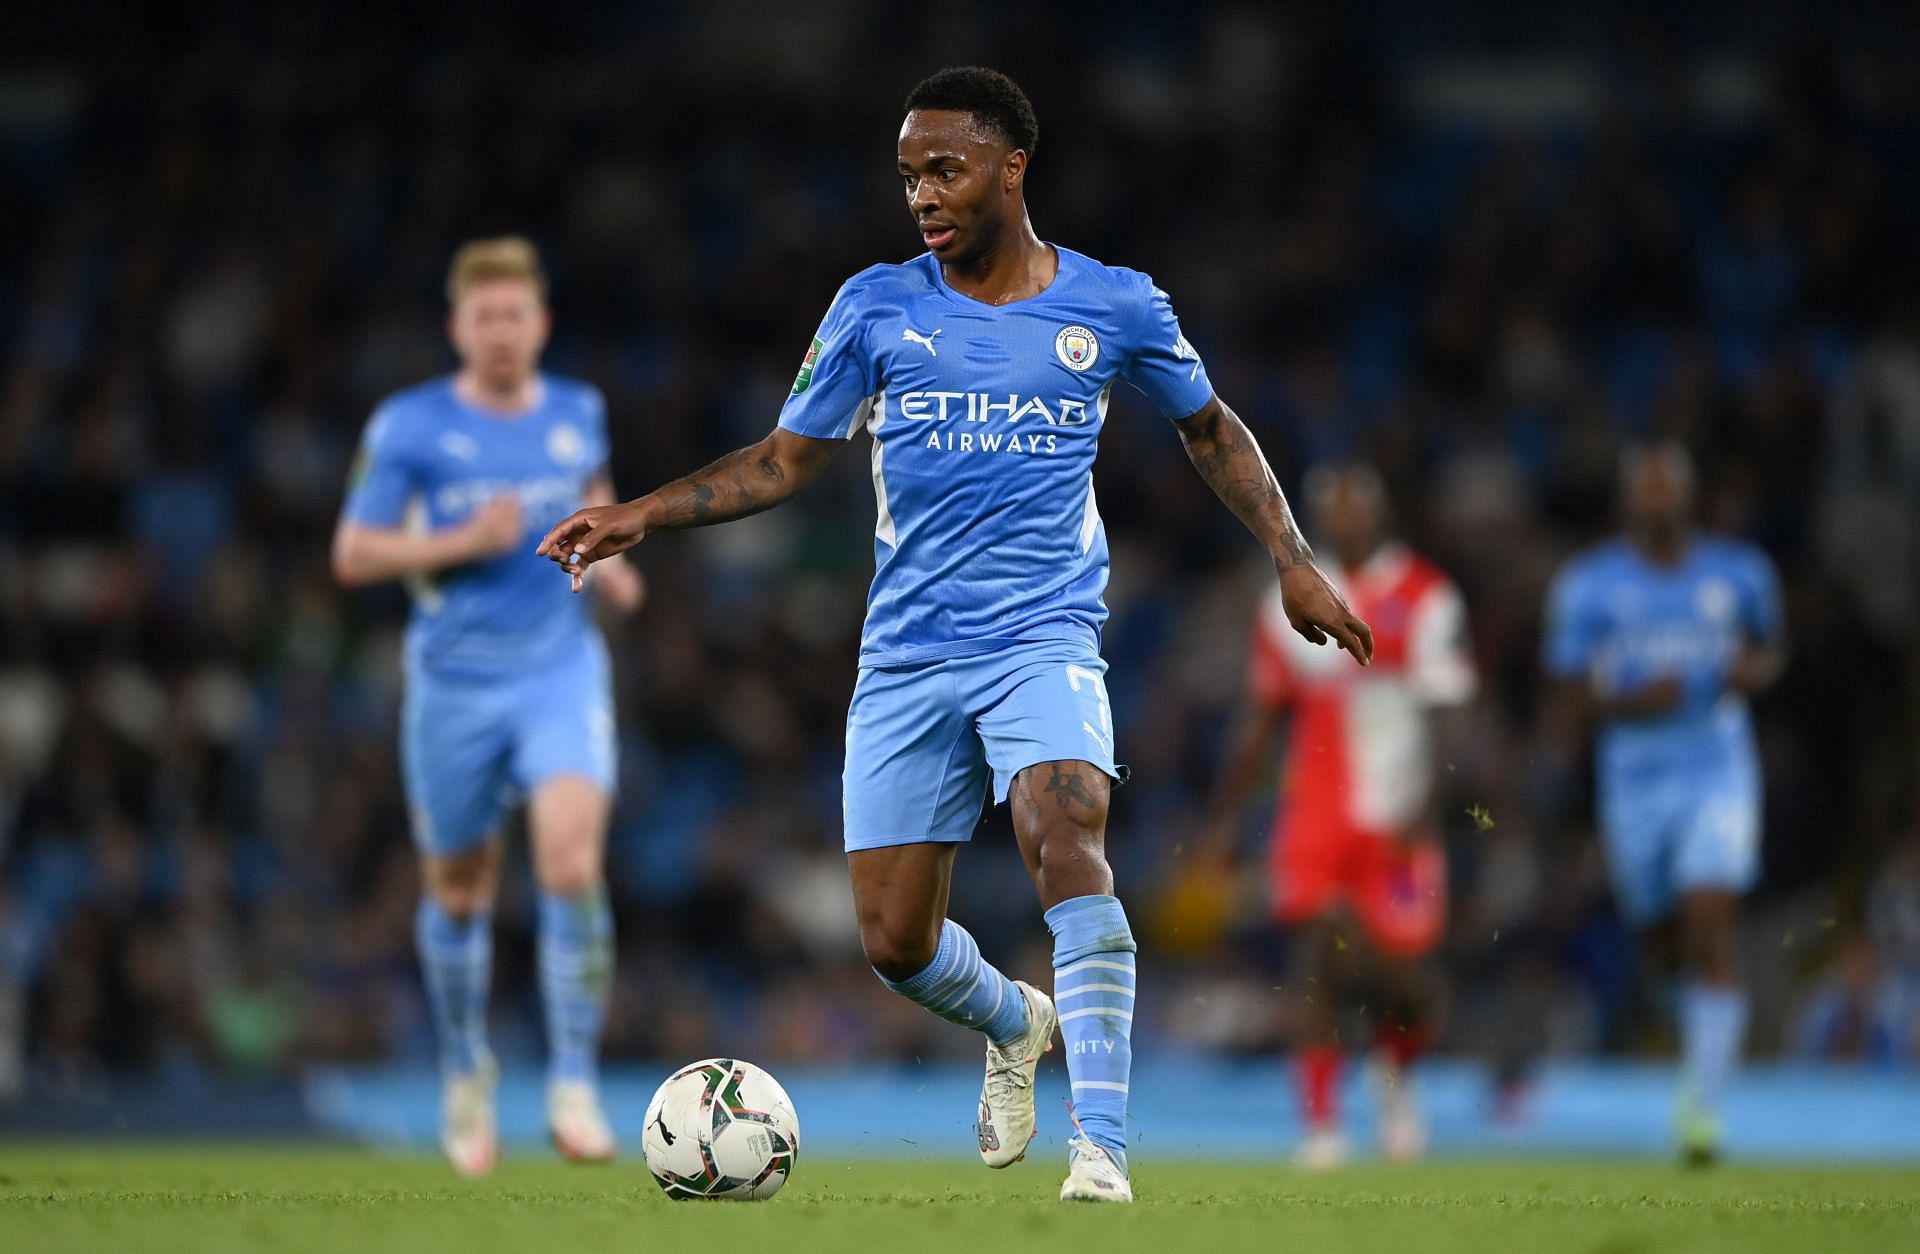 Raheem Sterling is a key player for Manchester City.